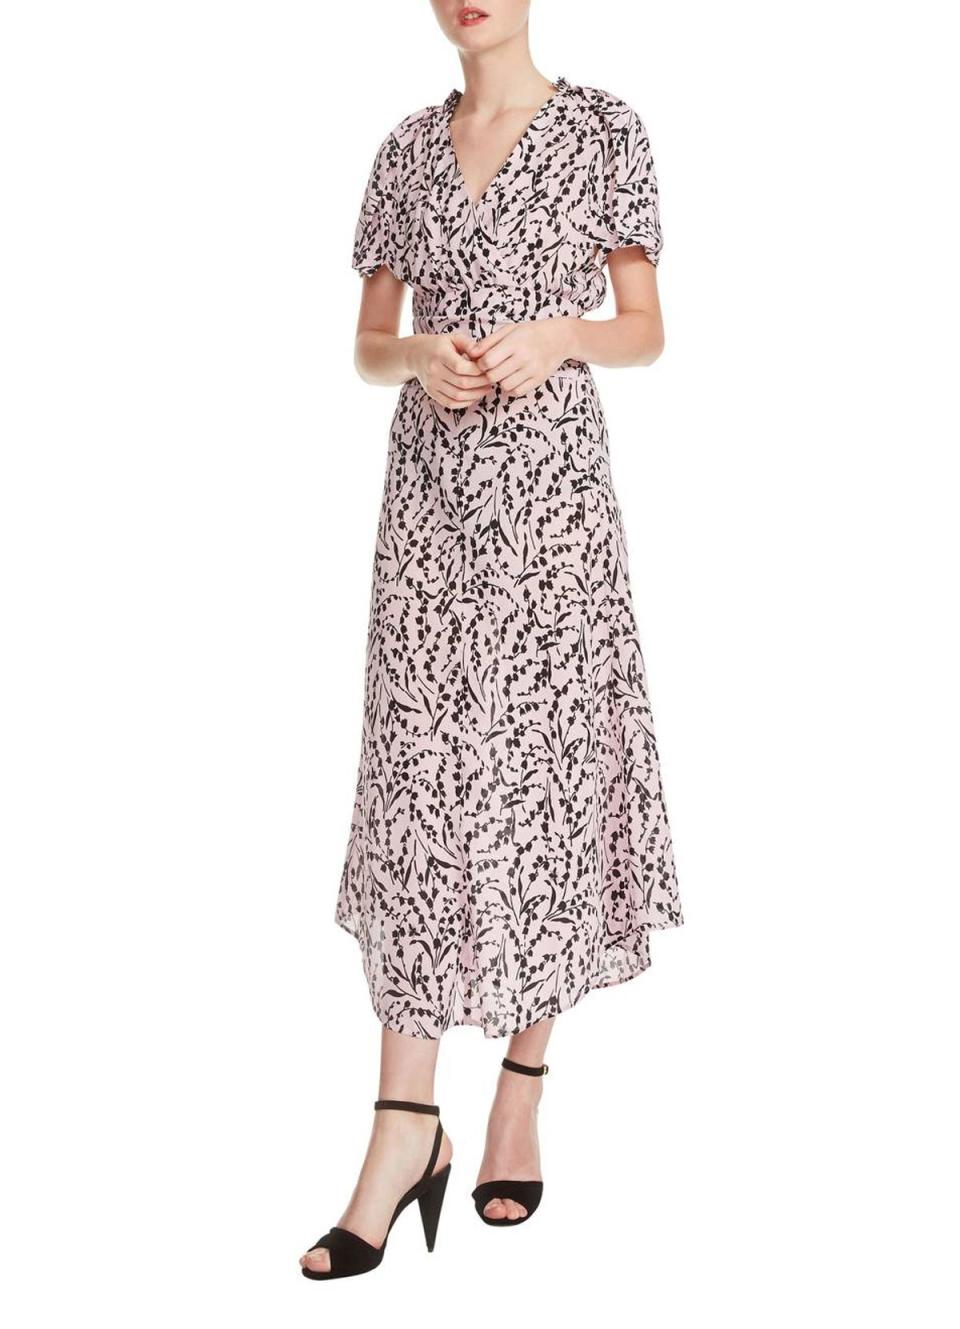 "When I opened my closet this morning, after Alexa told me the high for the day would be 80 degrees, I realized I was woefully low on office-appropriate summer dresses. I love the sweet print on this, and it's not too low-cut to wear to work." —Amanda FitzSimons, contributing editor